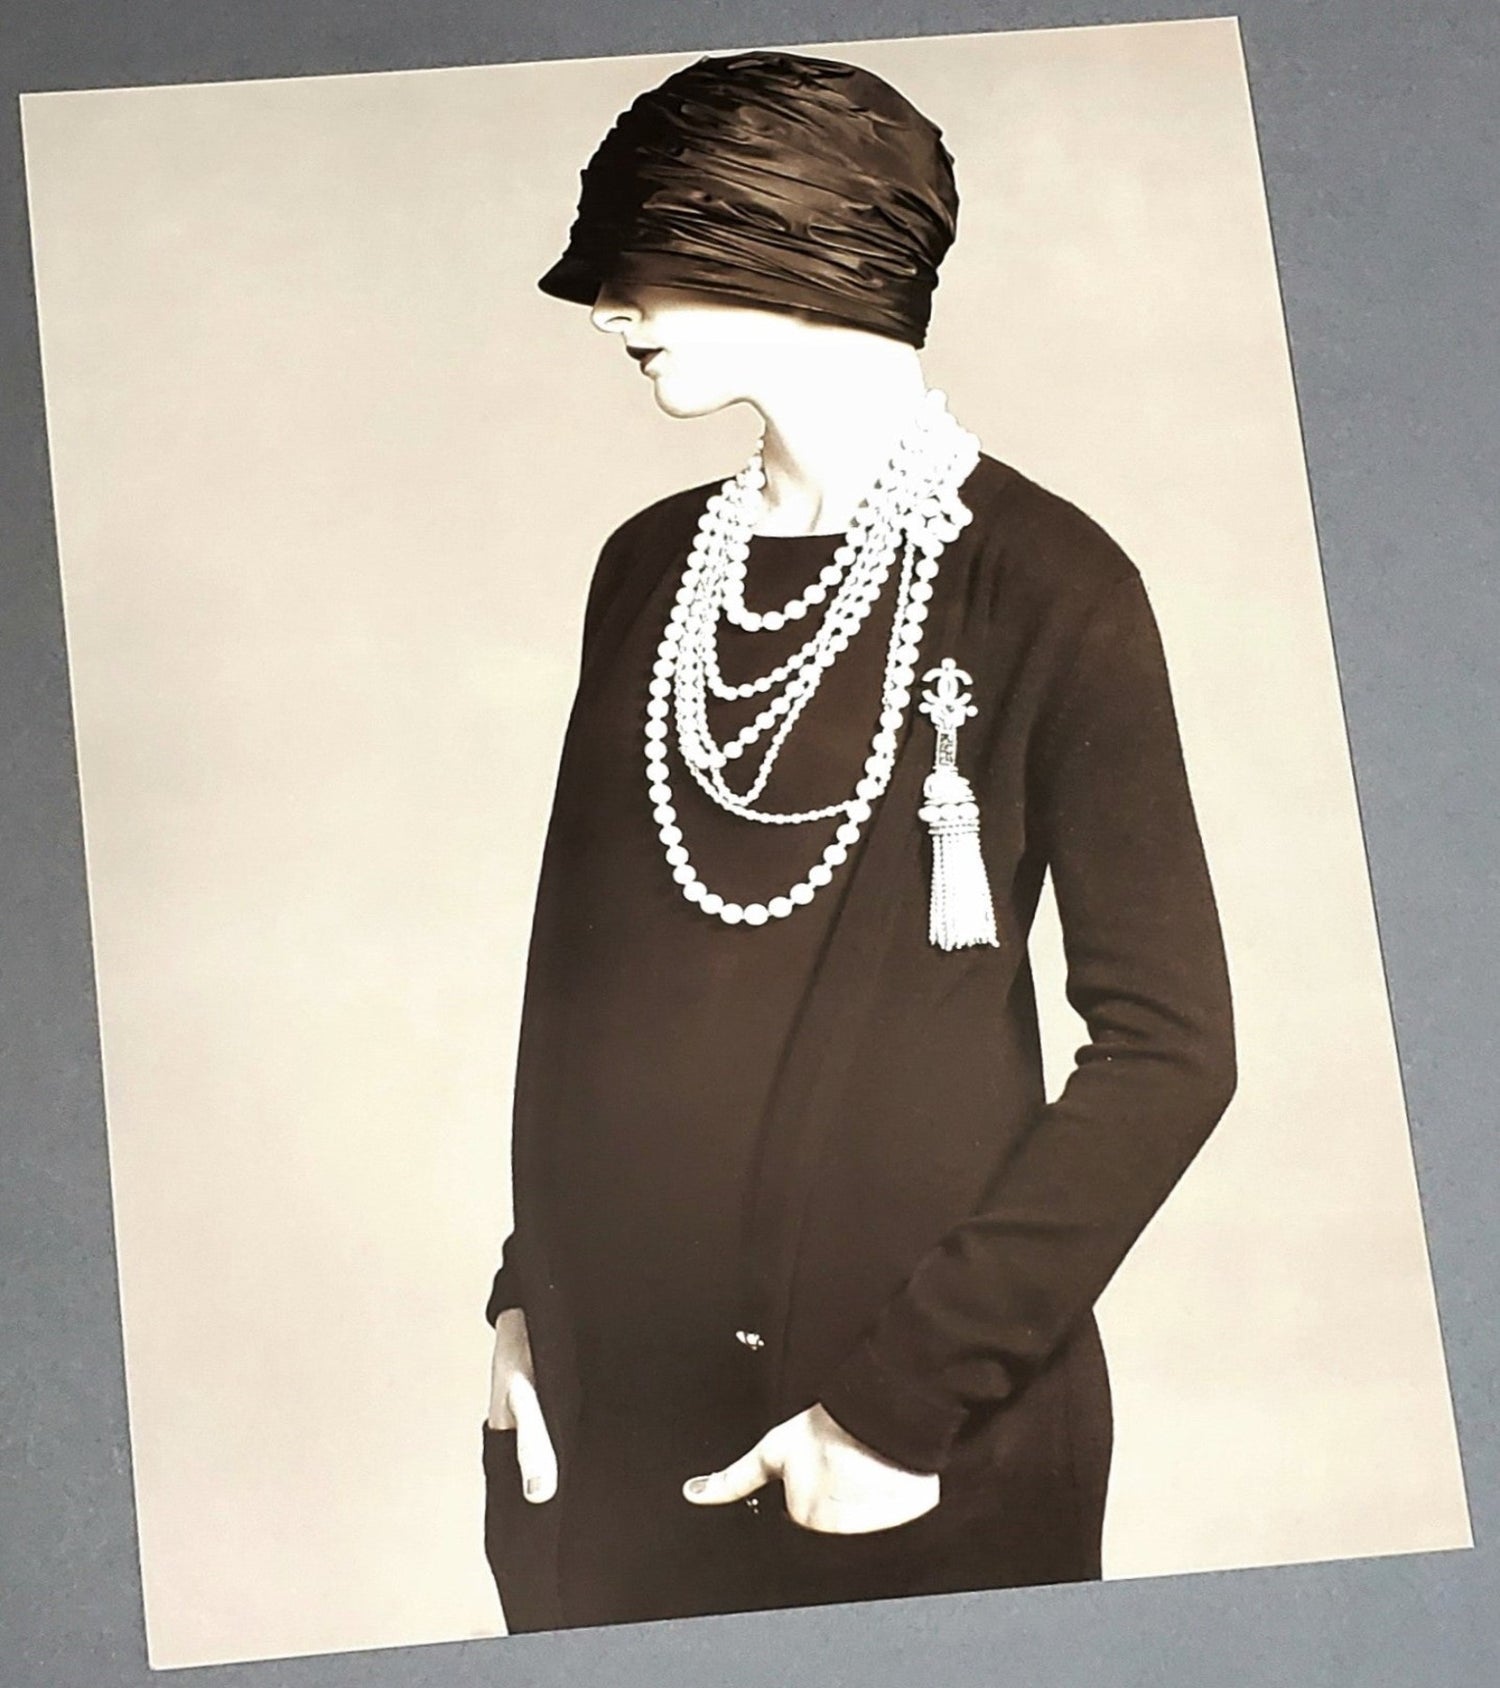 1920s Fashion- Coco Chanel Inspired  Chanel inspired, Coco chanel, 1920s  fashion